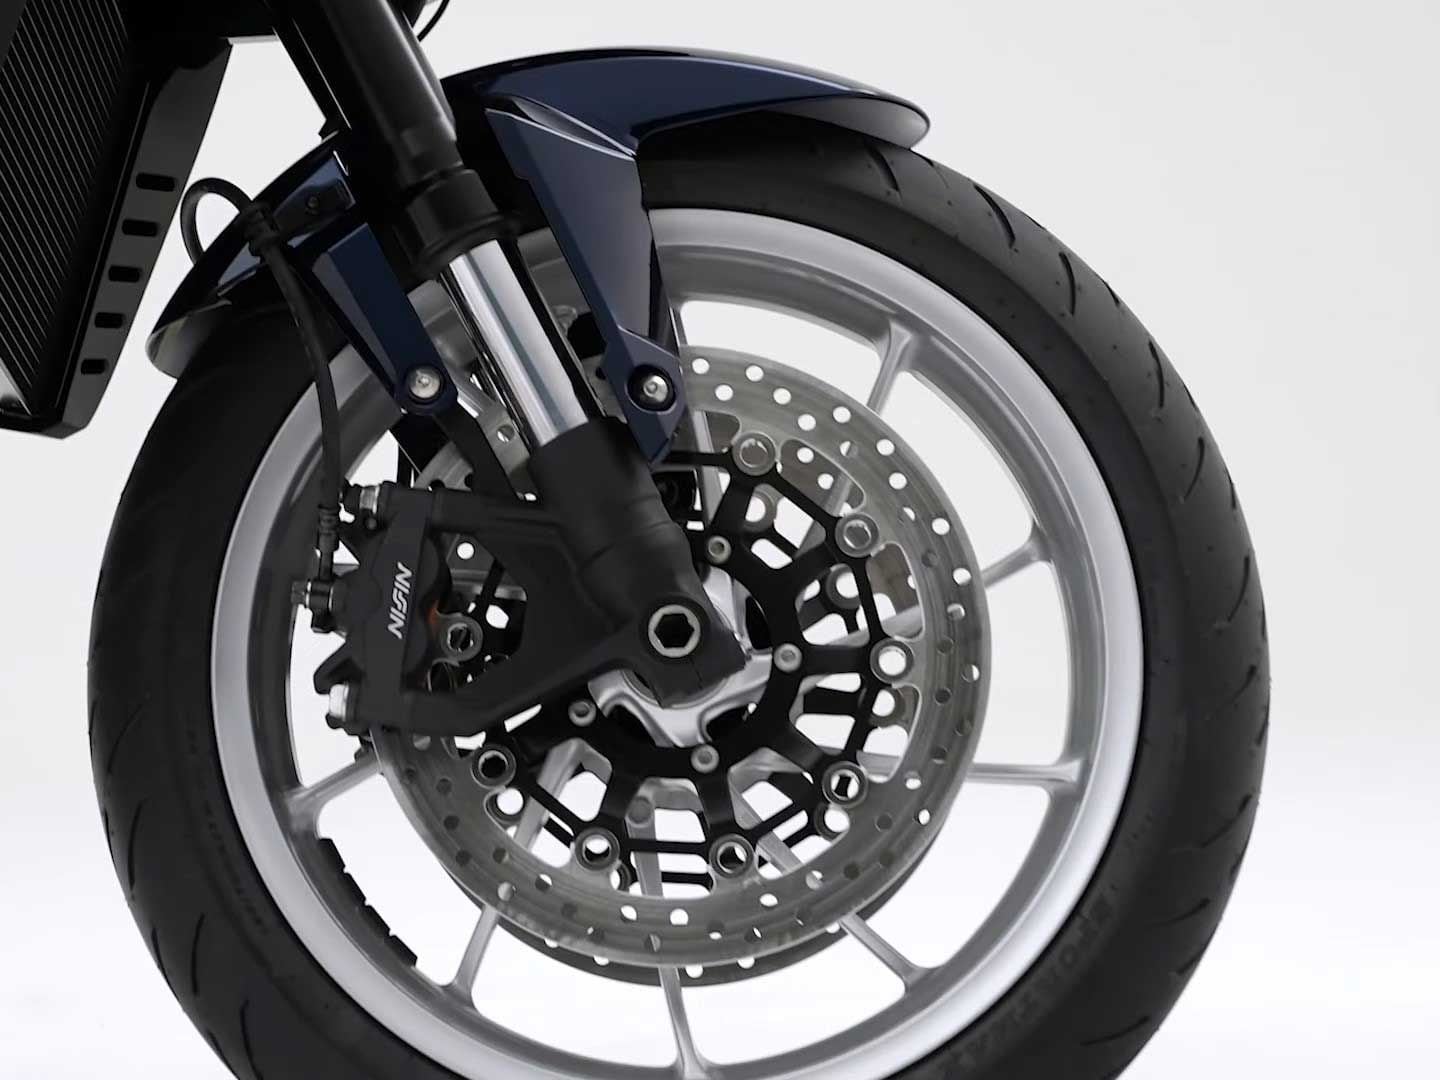 The 17-inch alloy wheels carry over from the NT1100, though the Hawk gets a different Showa SFF-BP fork.